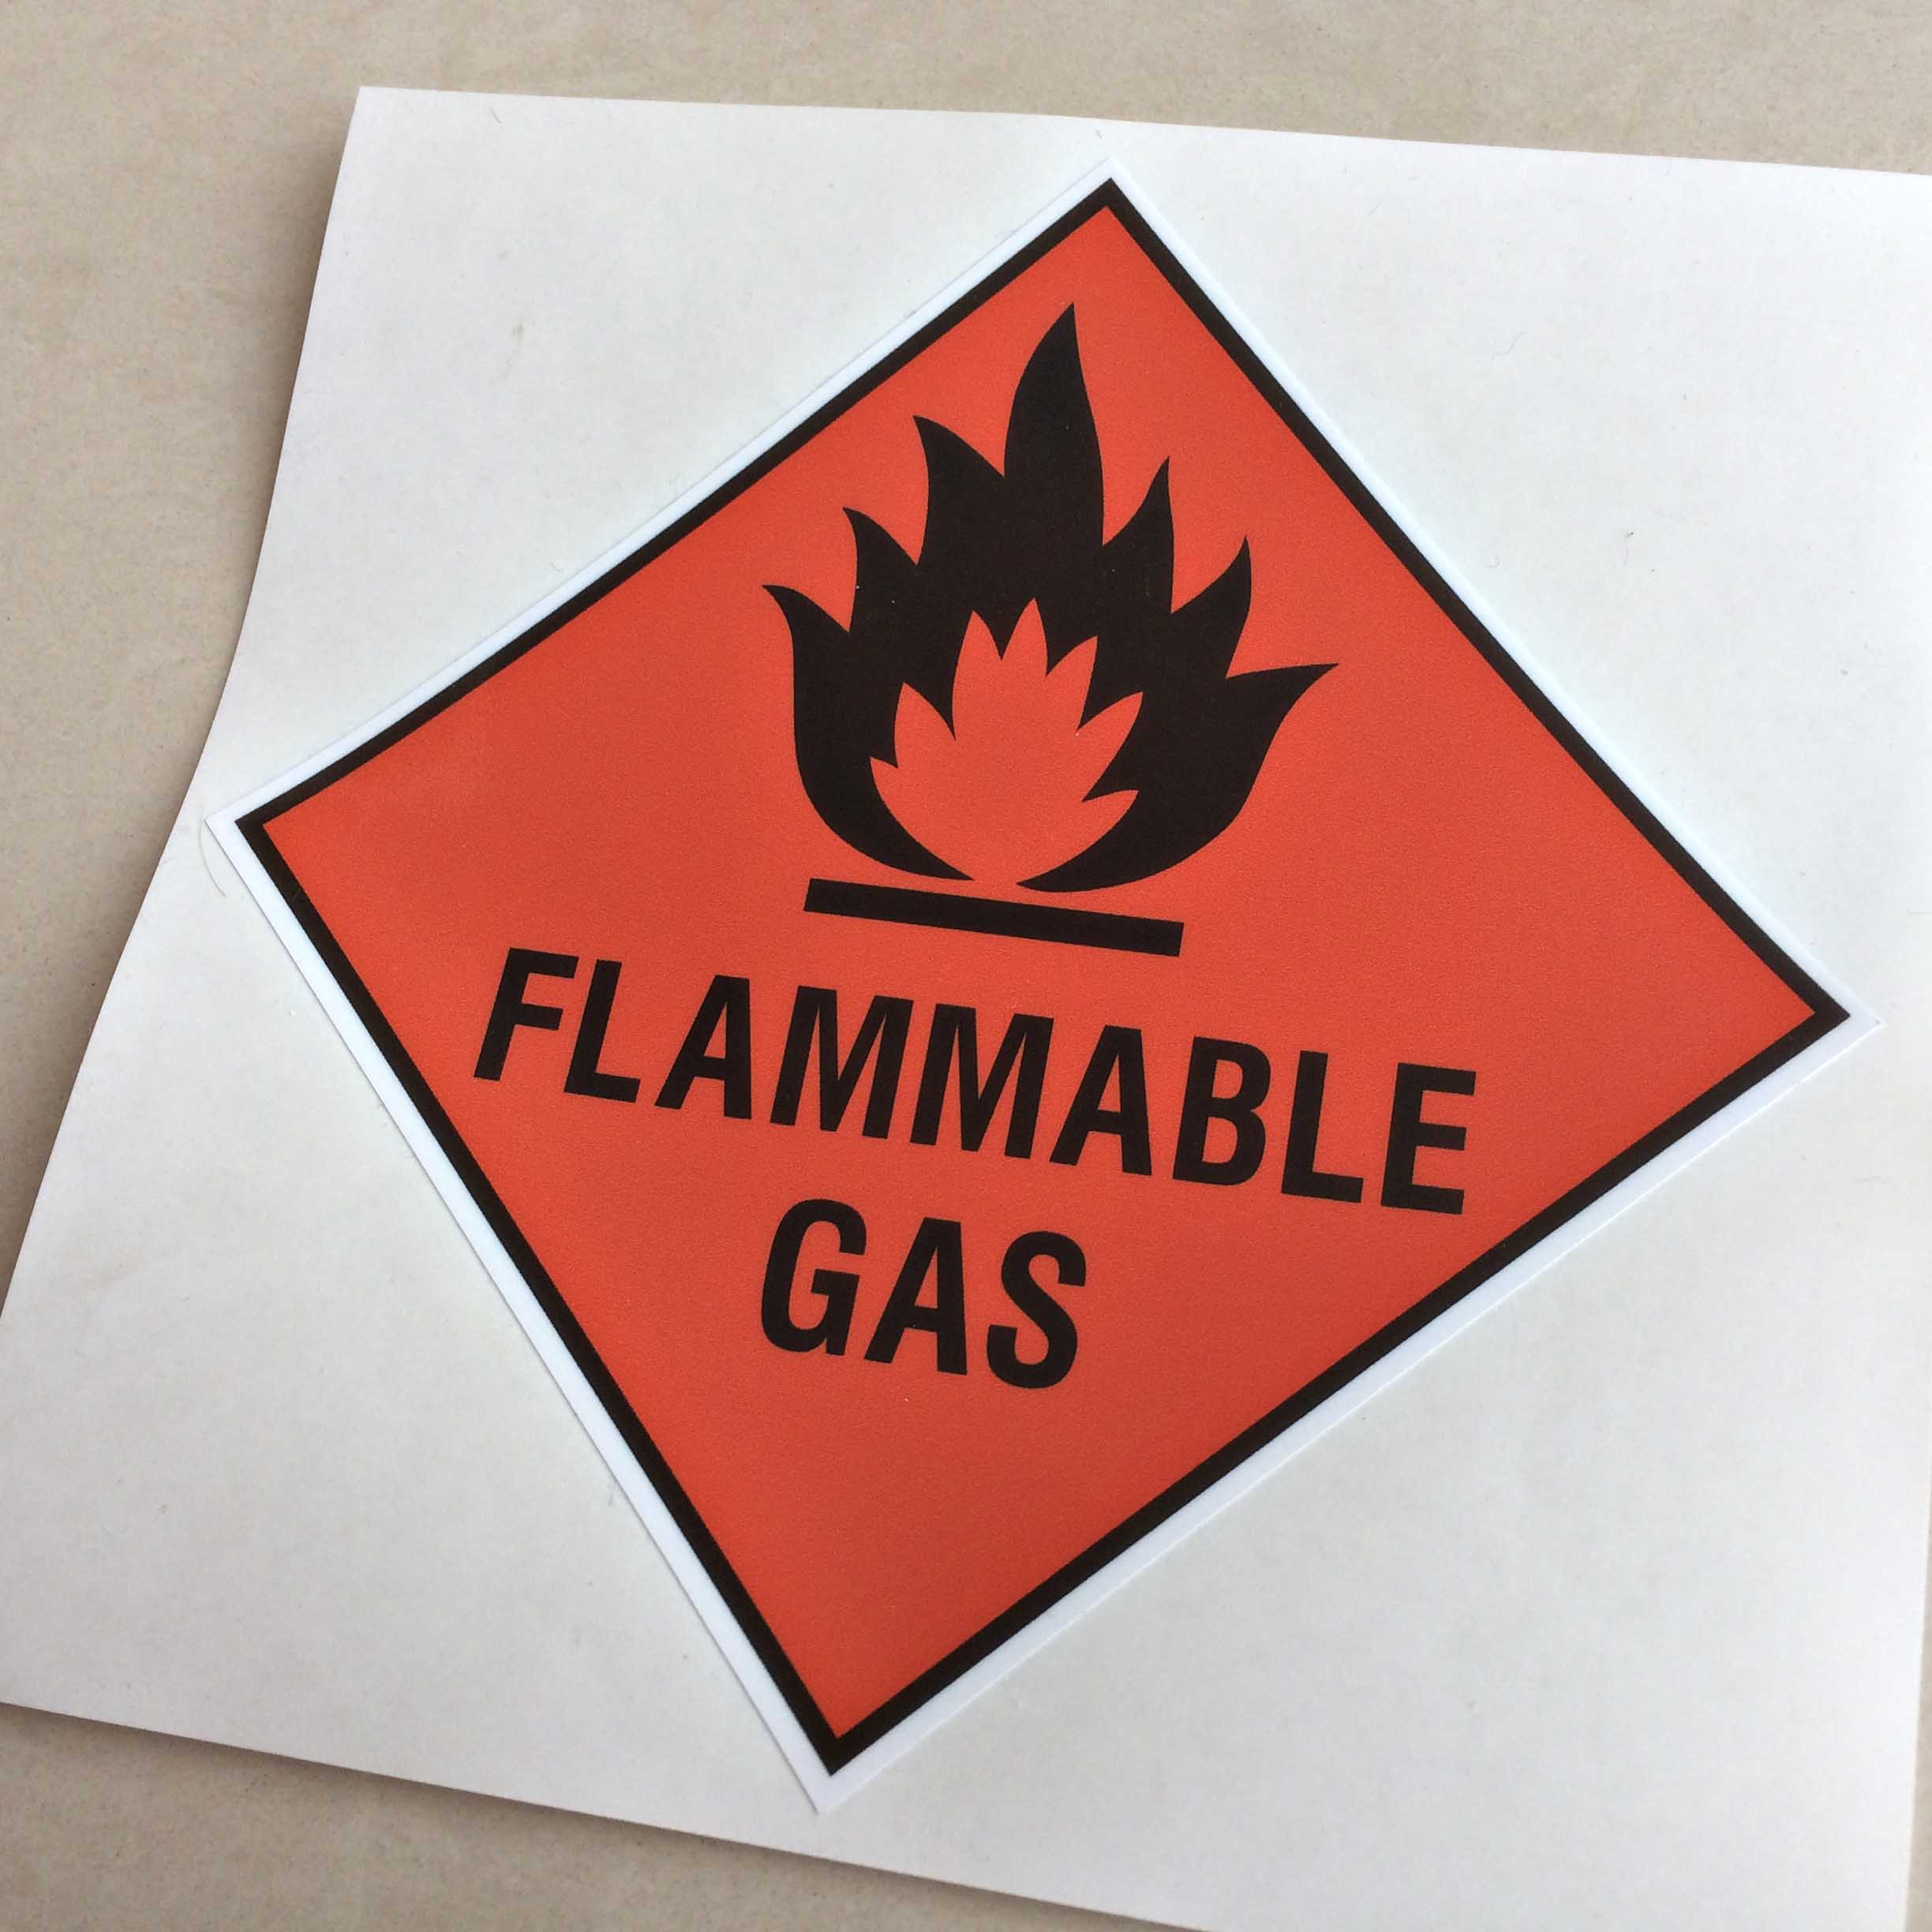 FLAMMABLE GAS LAMINATED STICKER. Flammable Gas in black capitals and a black flame on a red diamond.